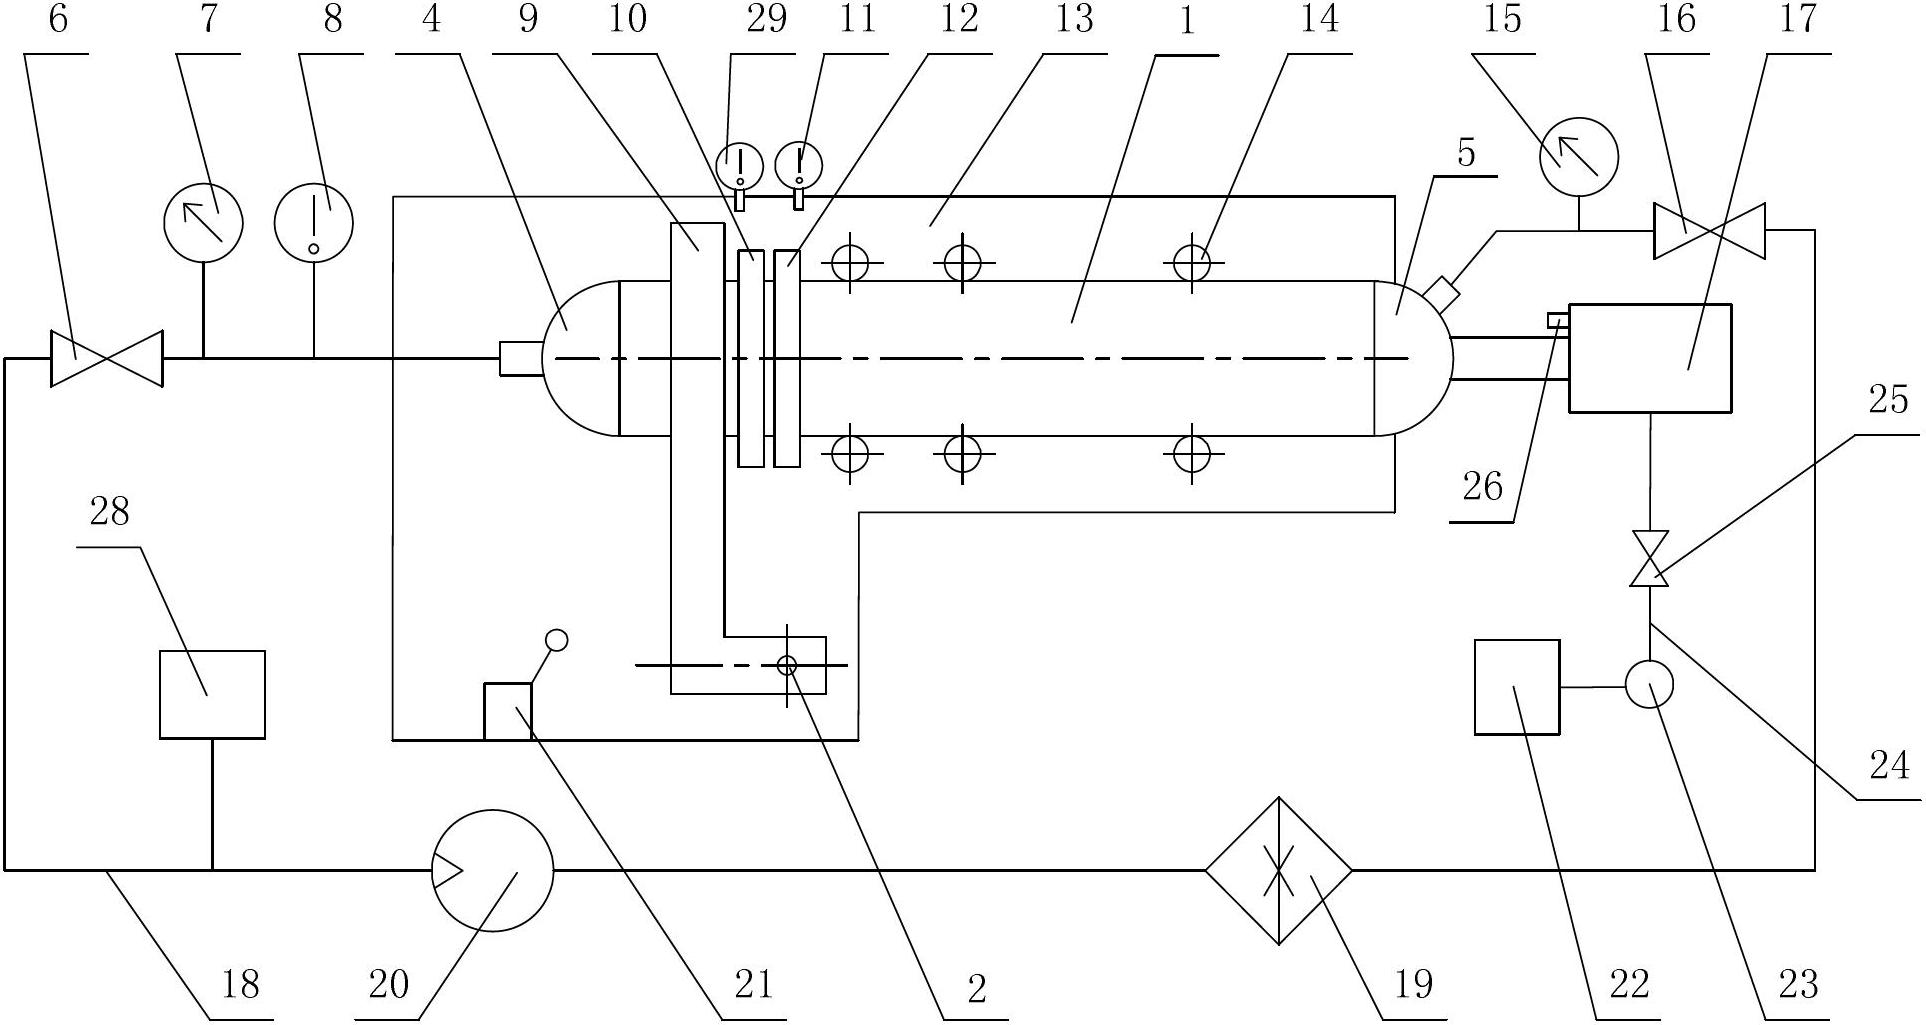 Manufacturing device and method for bimetal composite hot bend